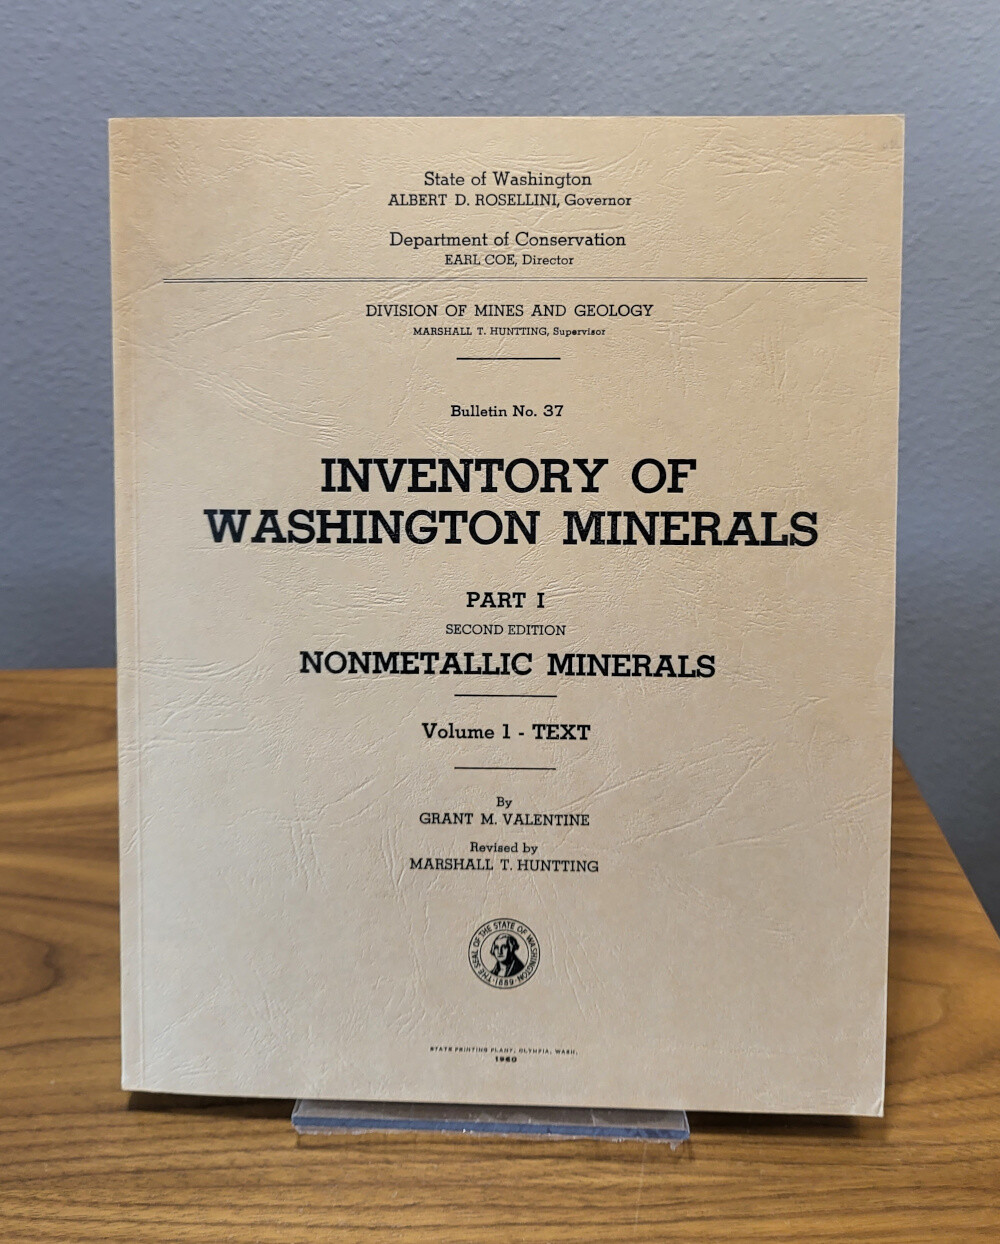 Inventory of Washington Minerals Second Edition in Two Volumes Volume 1: Nonmetallic Minerals Texts, Volume 2: Metallic Minerals Maps